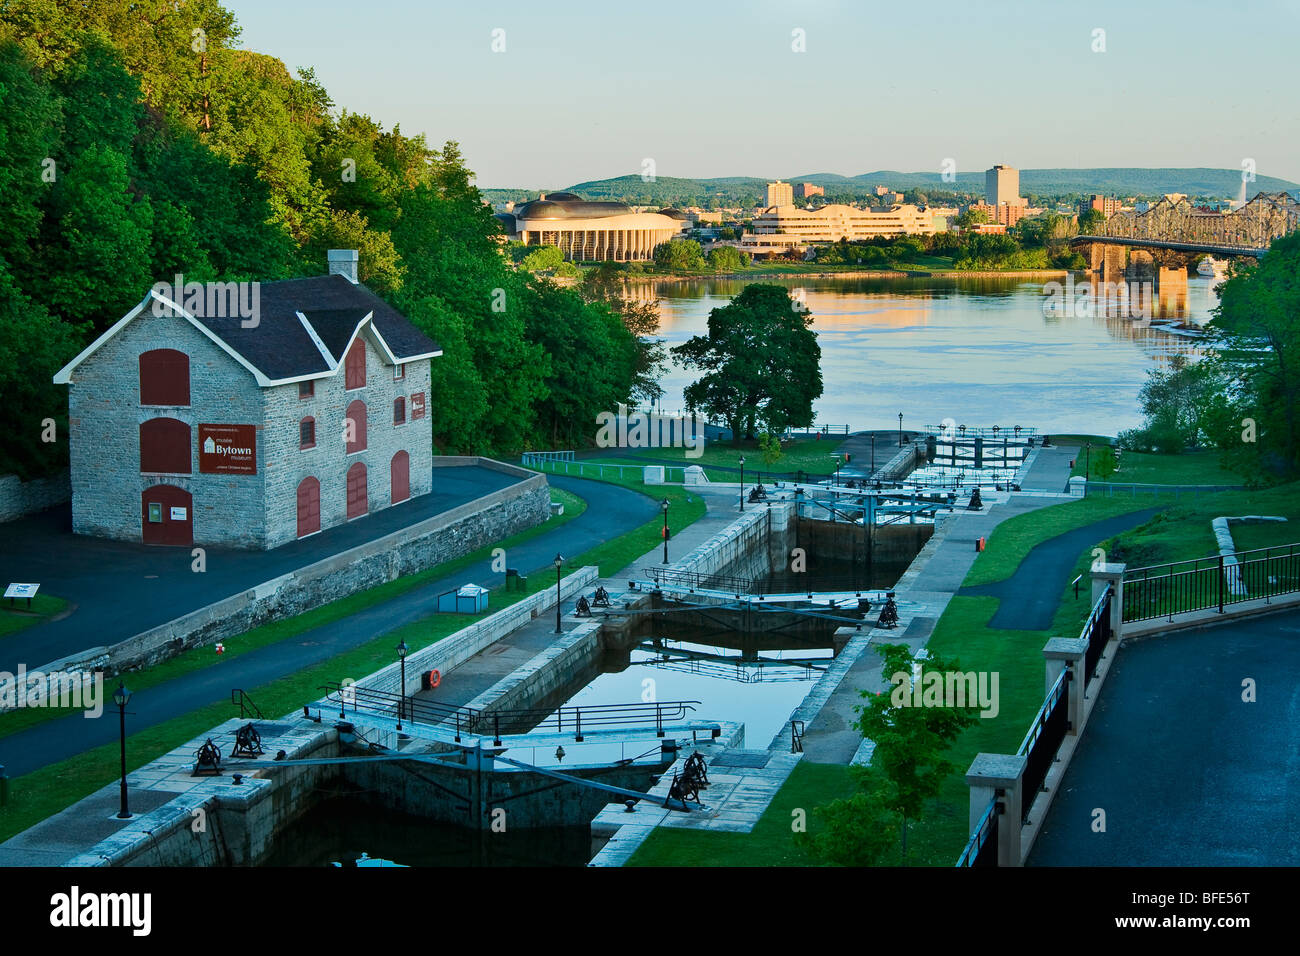 View of the Rideau Canal locks and the city of Hull from a terrace next to the Chateau Laurier, Ottawa, Ontario, Canada Stock Photo